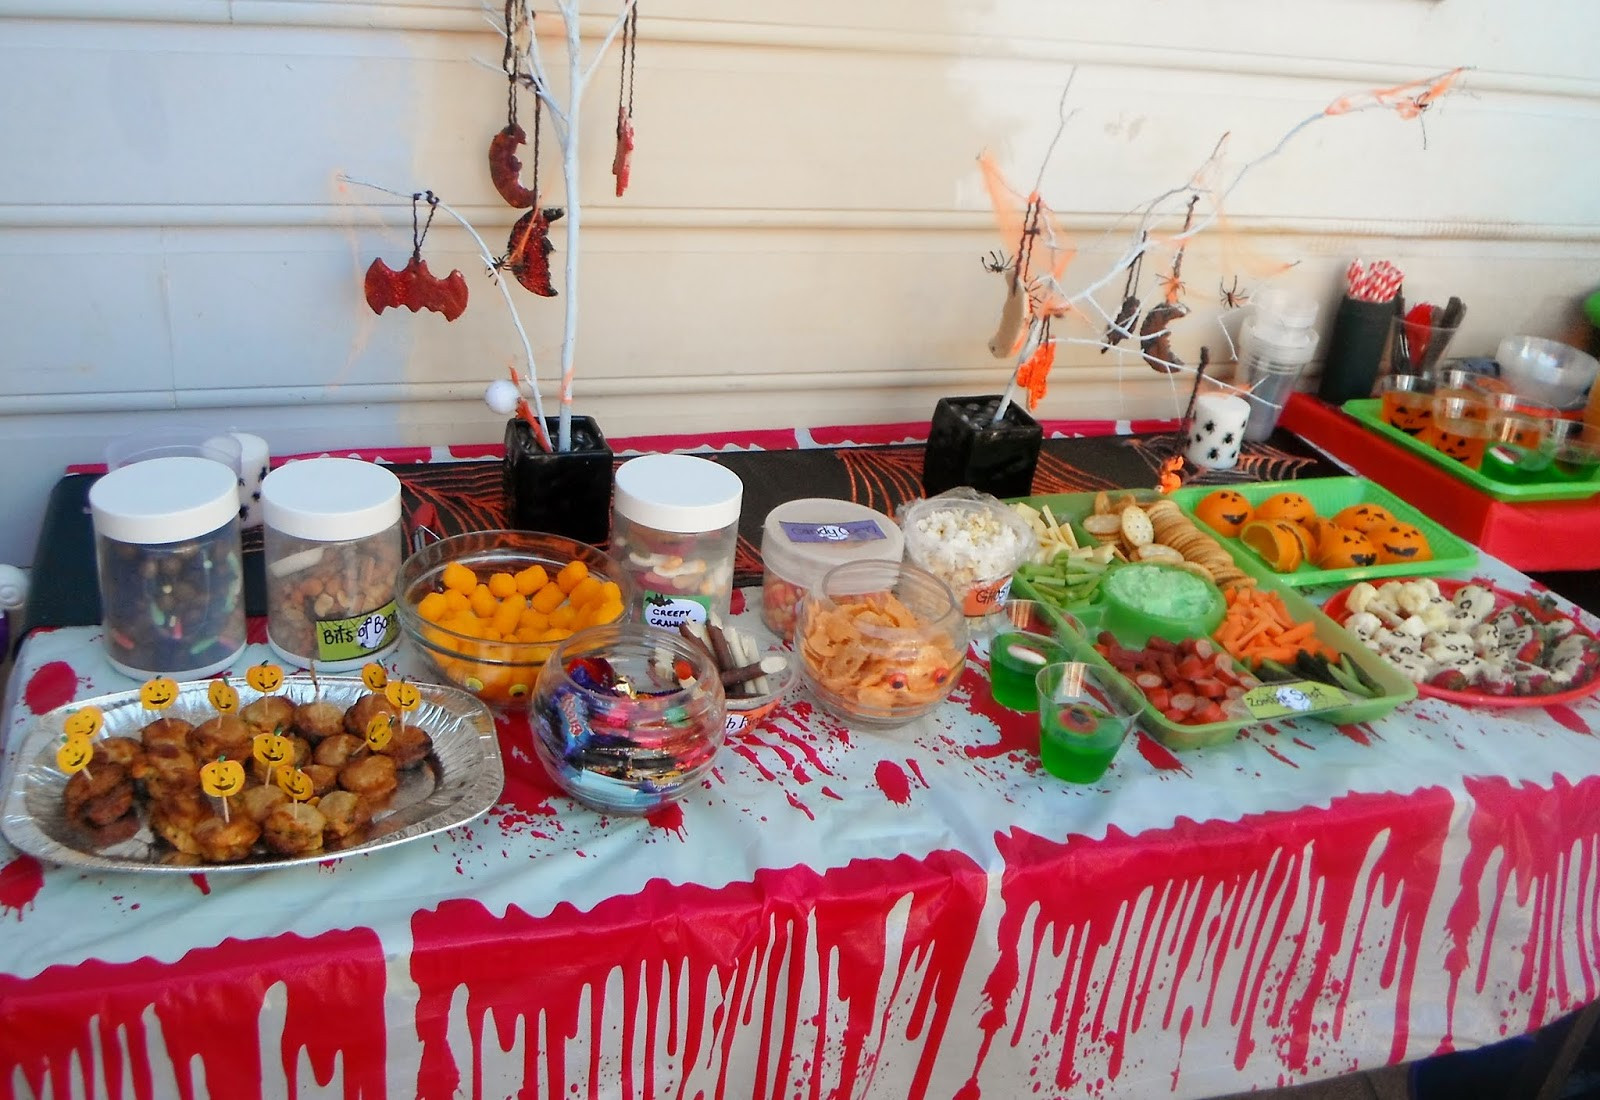 Kids Birthday Party Food Idea
 Adventures at home with Mum Halloween Party Food